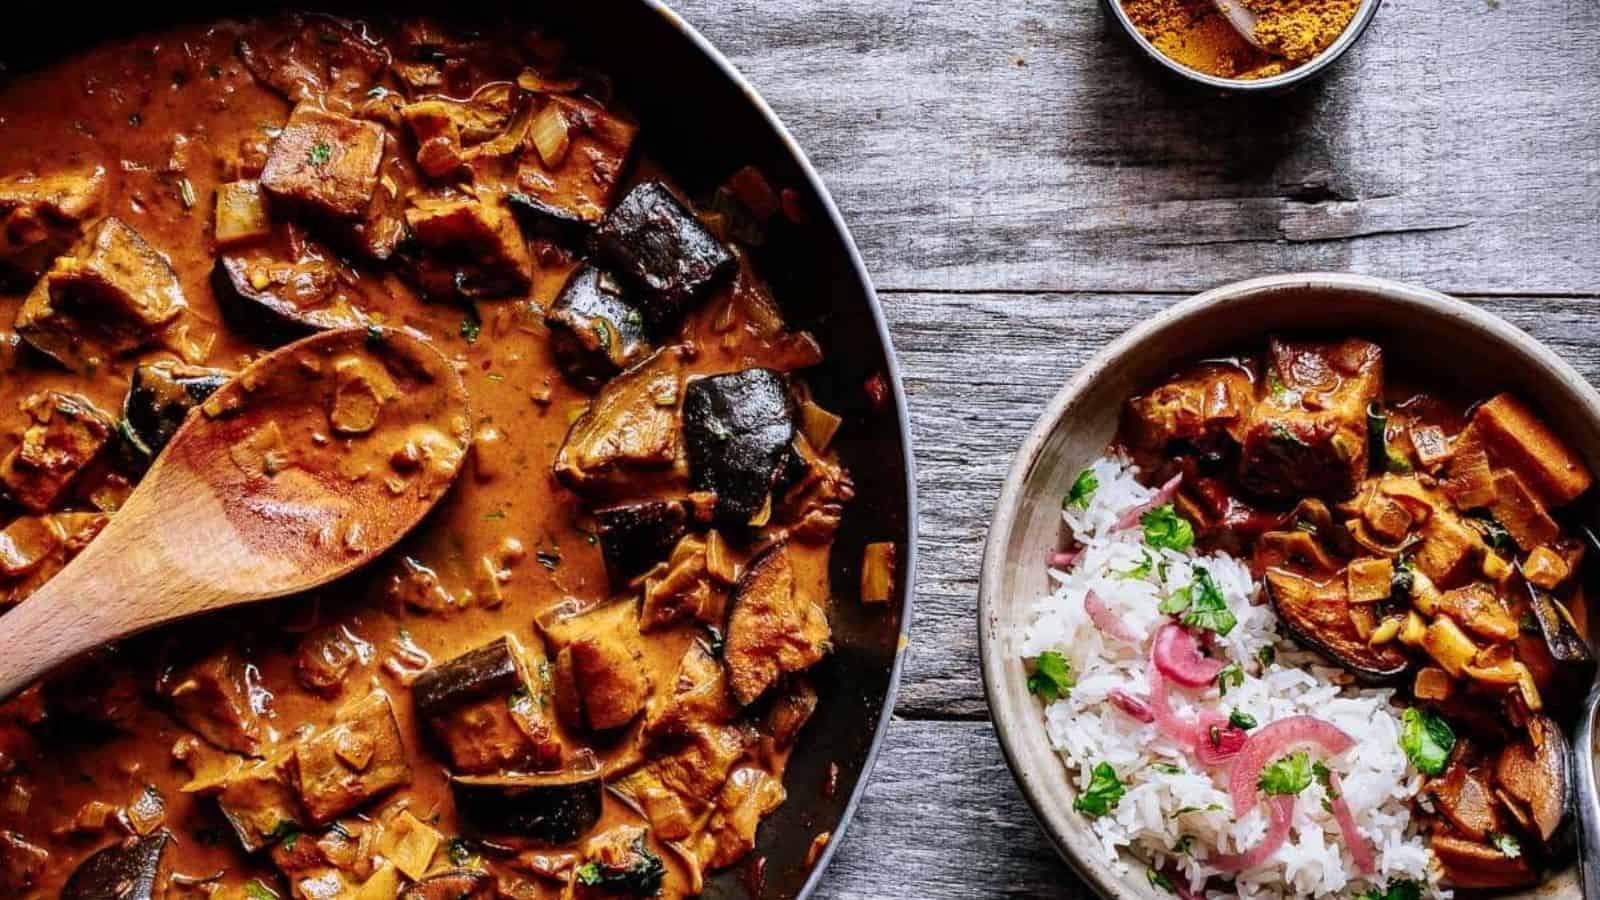 A vibrant and inviting bowl of creamy eggplant curry garnished with fresh cilantro on top.